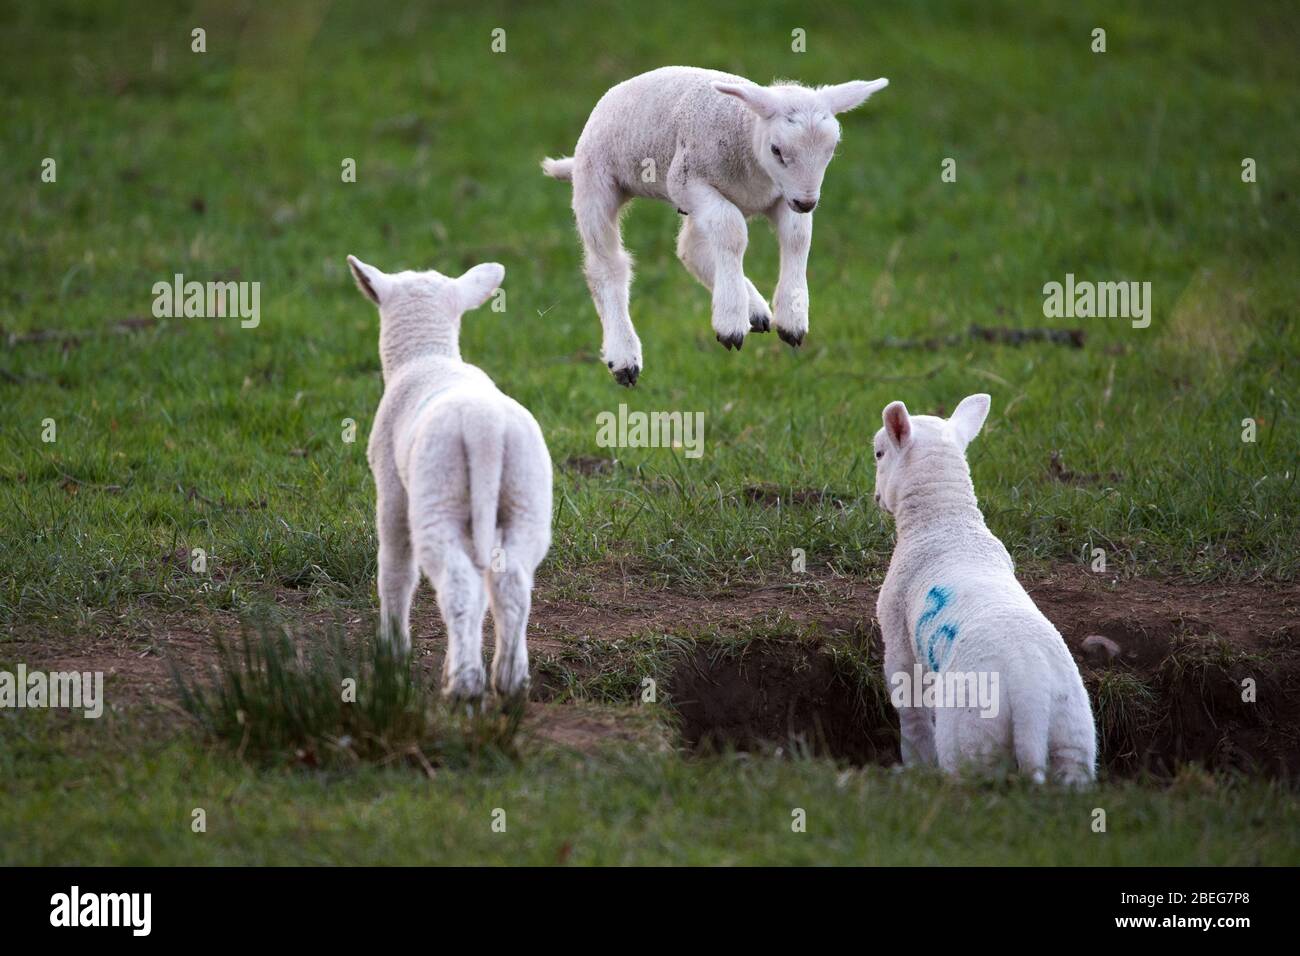 Doune, UK. 13th Apr, 2019. Pictured: Spring Lambs play in the late evening light on Bank Holiday Easter Monday. The Coronavirus (COVID-19) lockdown has been in place for almost 3 weeks allowing the expectant mother ewes to give birth in relative peace. The tiny lambs play and jump in the fields and suckle for milk from their mothers. Credit: Colin Fisher/Alamy Live News Stock Photo